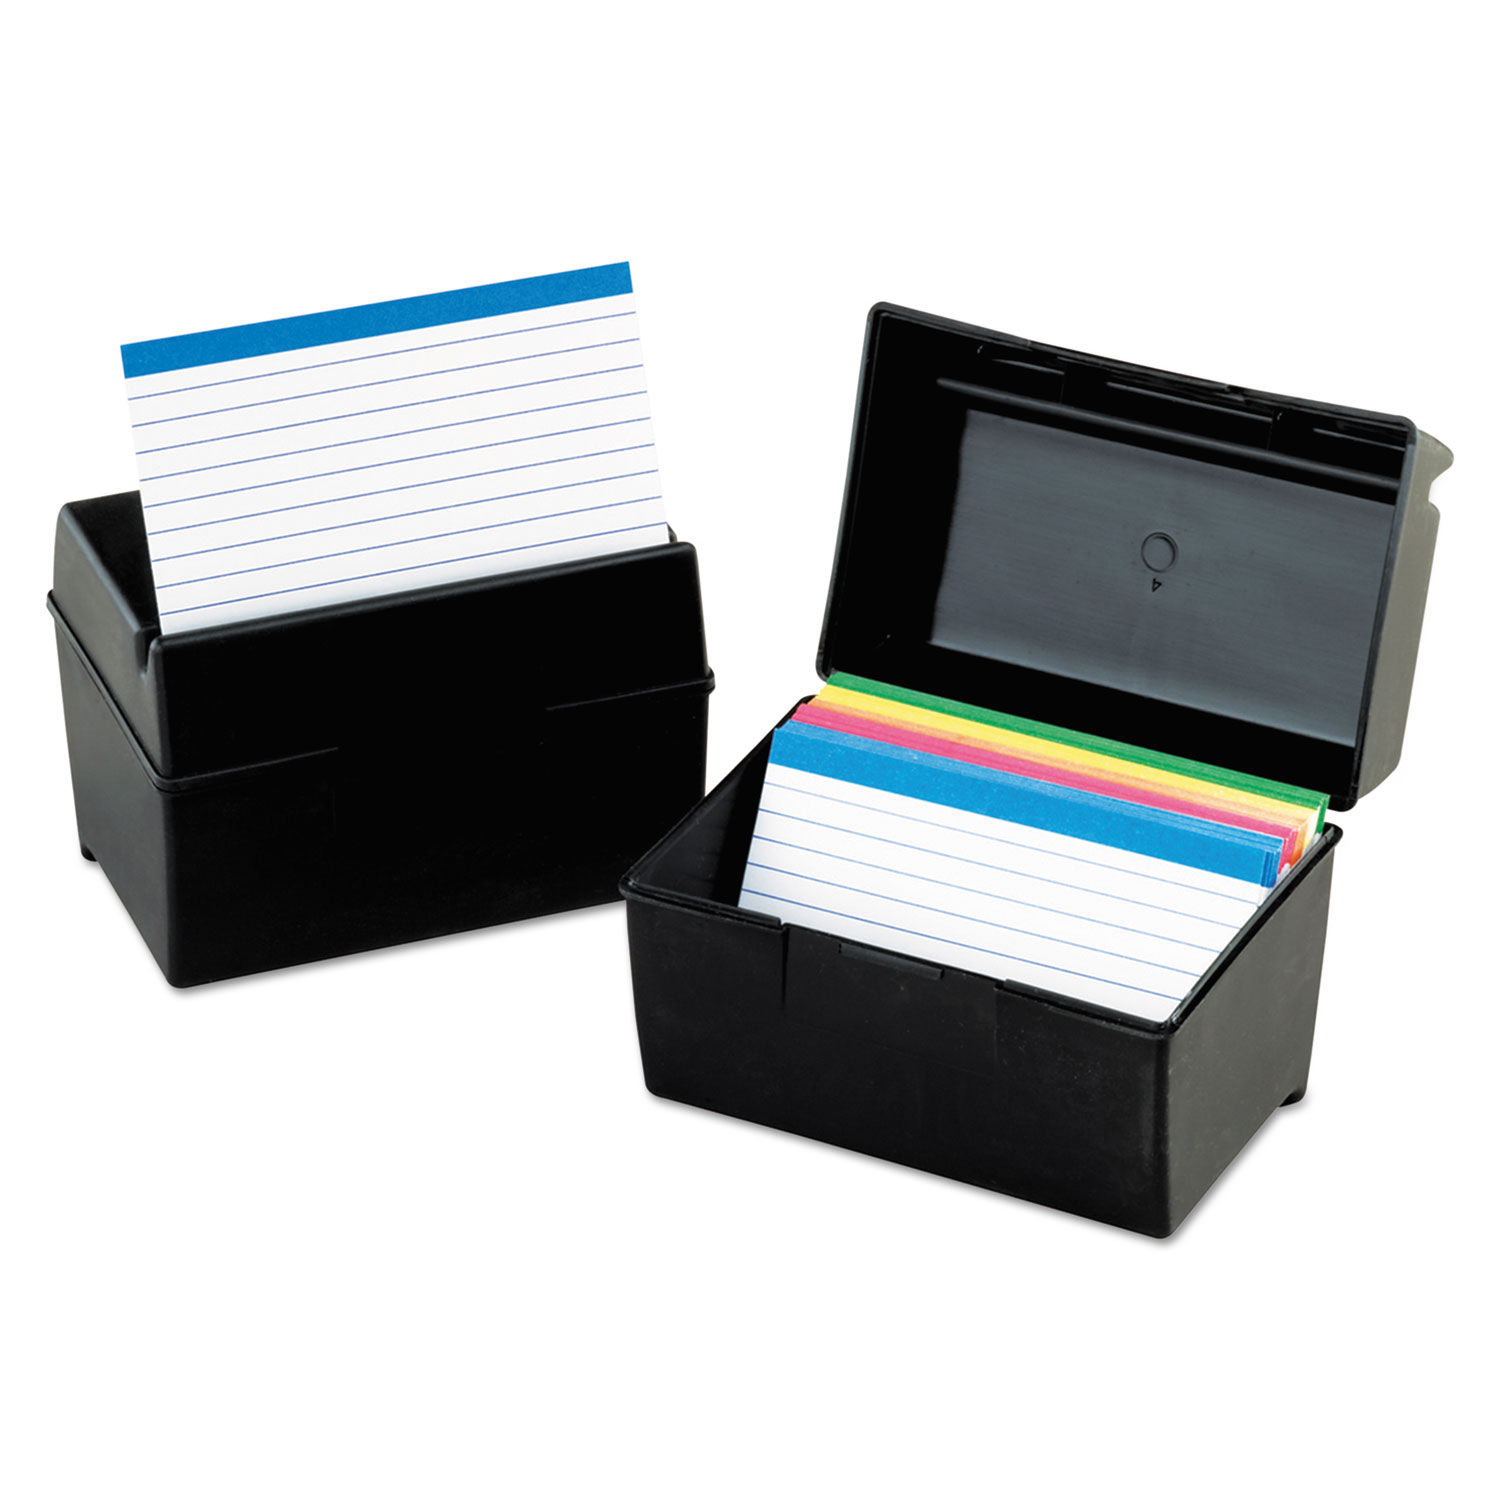 Plastic Index Card File Holds 300 3 x 5 Cards, 5.63 x 3.63 x 3.63, Black